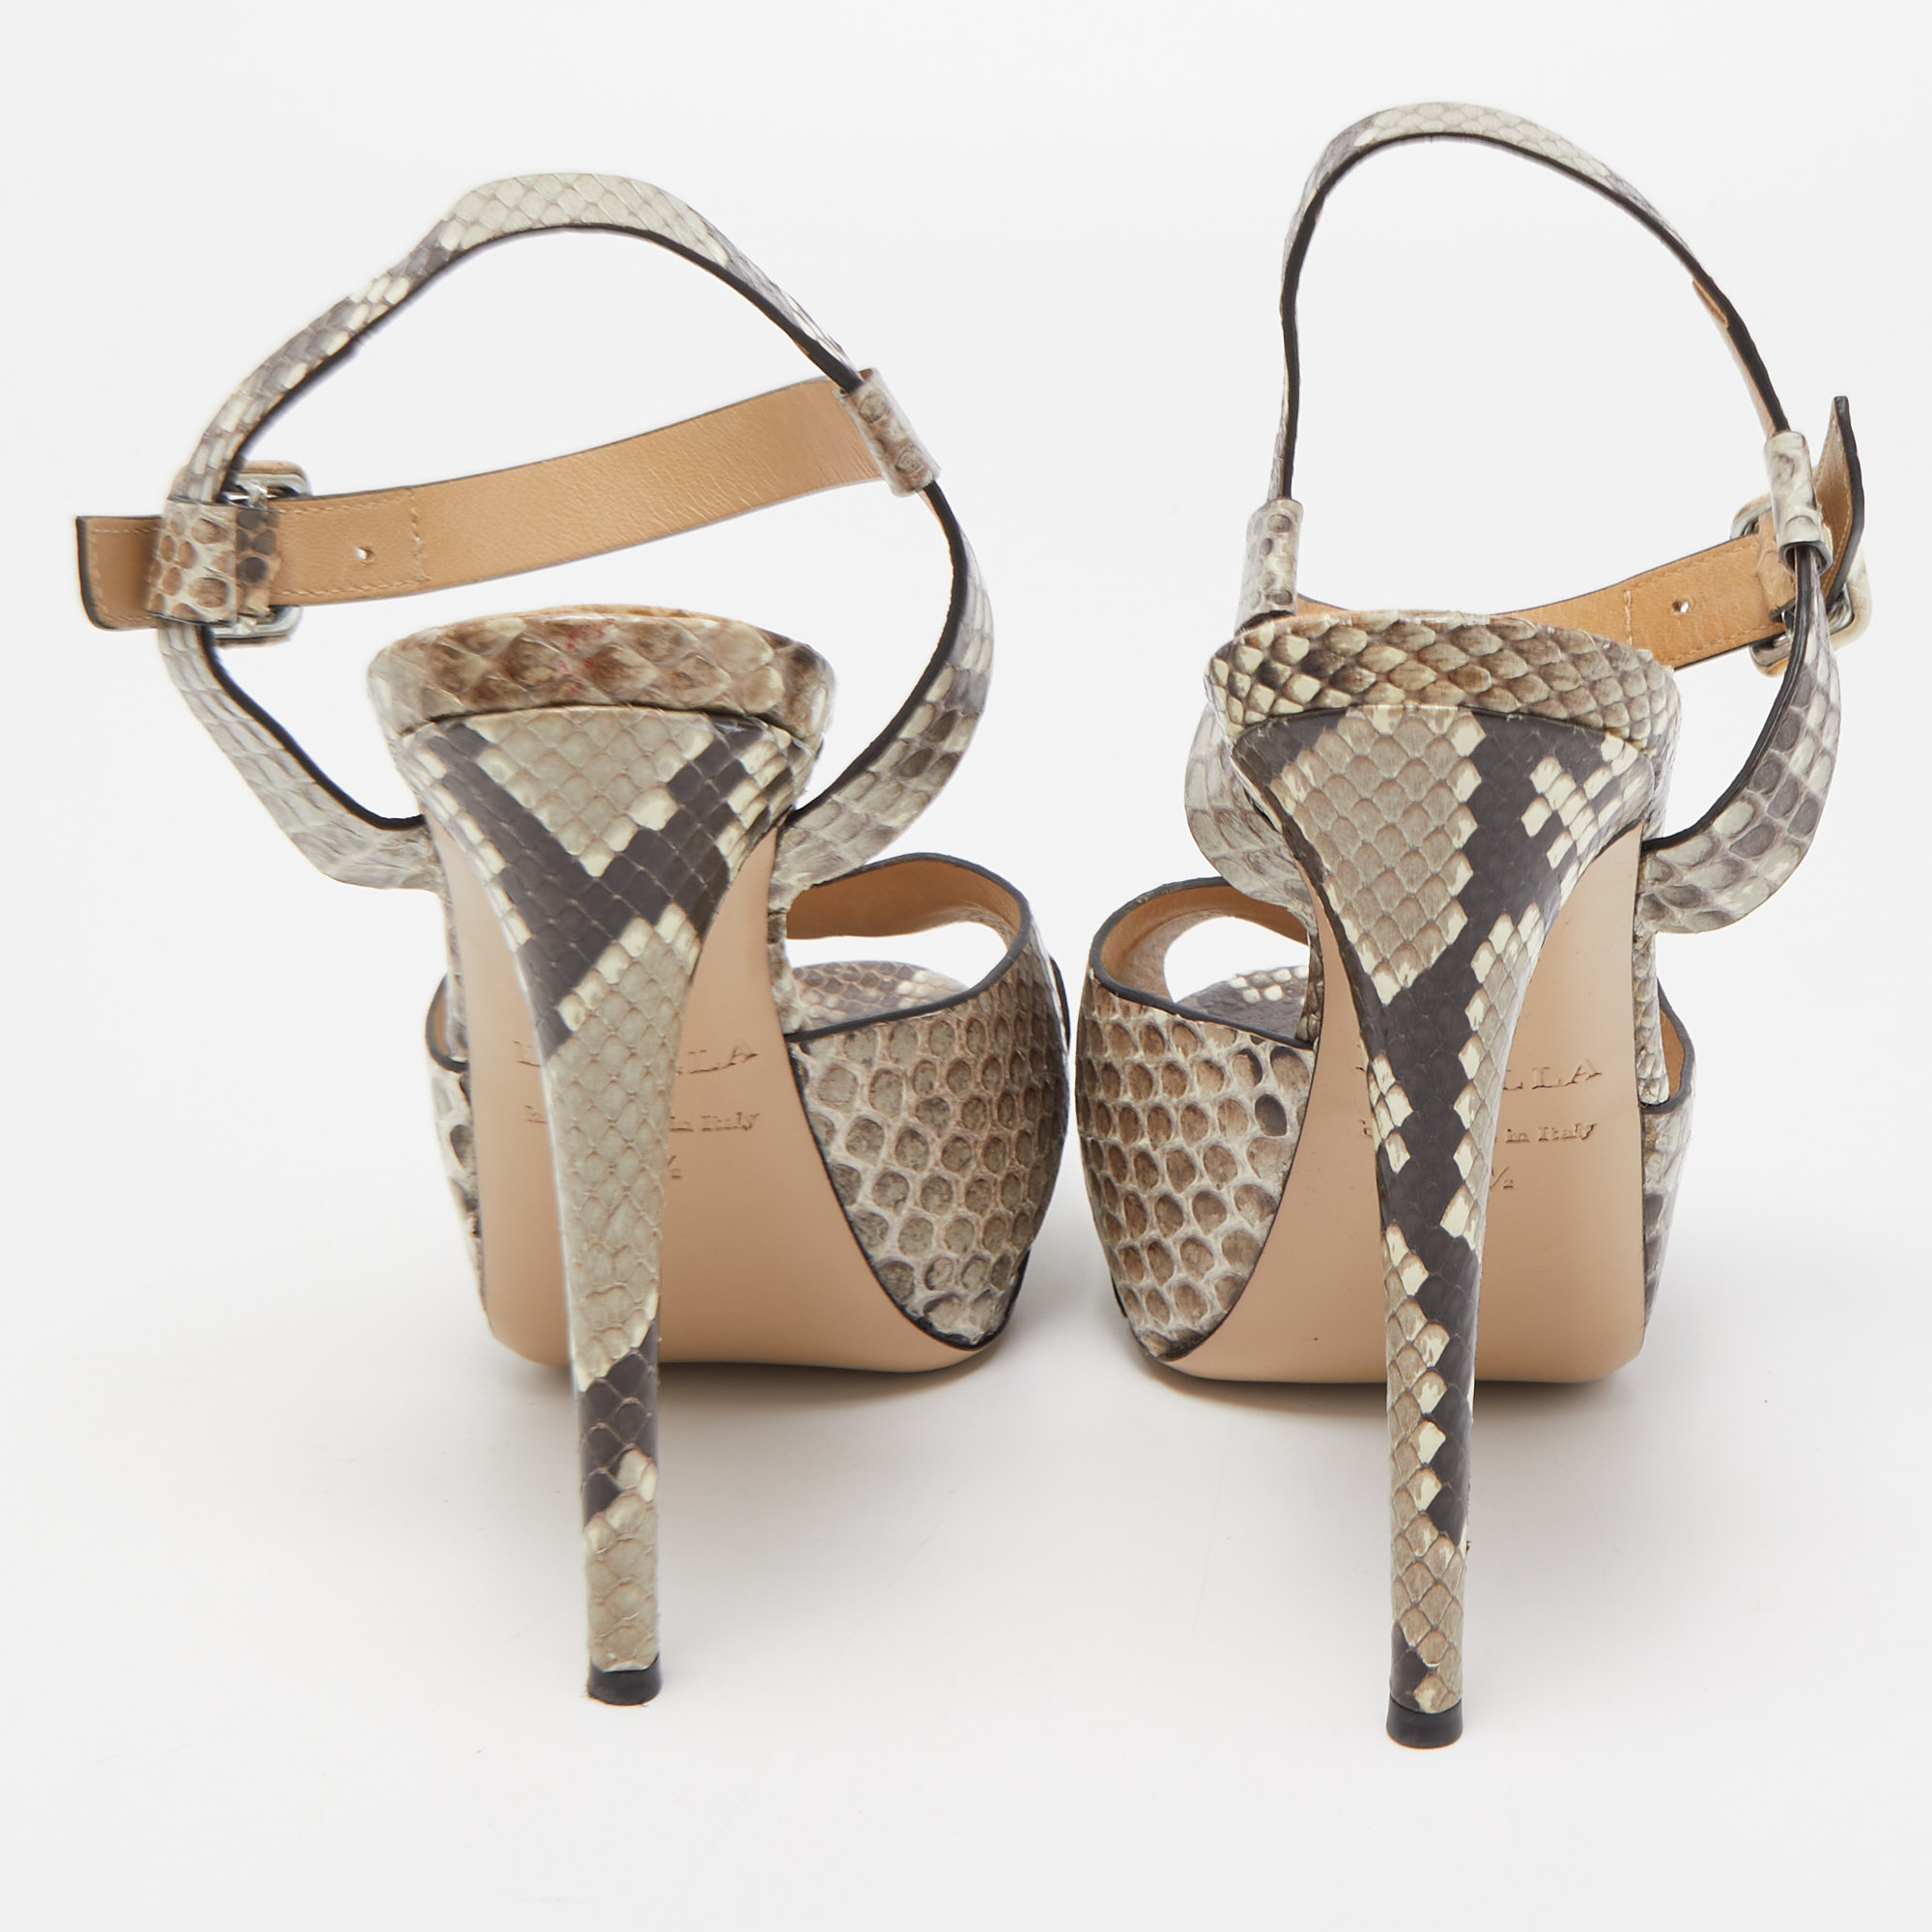 Le Silla Two Tone Python Embossed Leather Ankle Strap Sandals Size 37.5